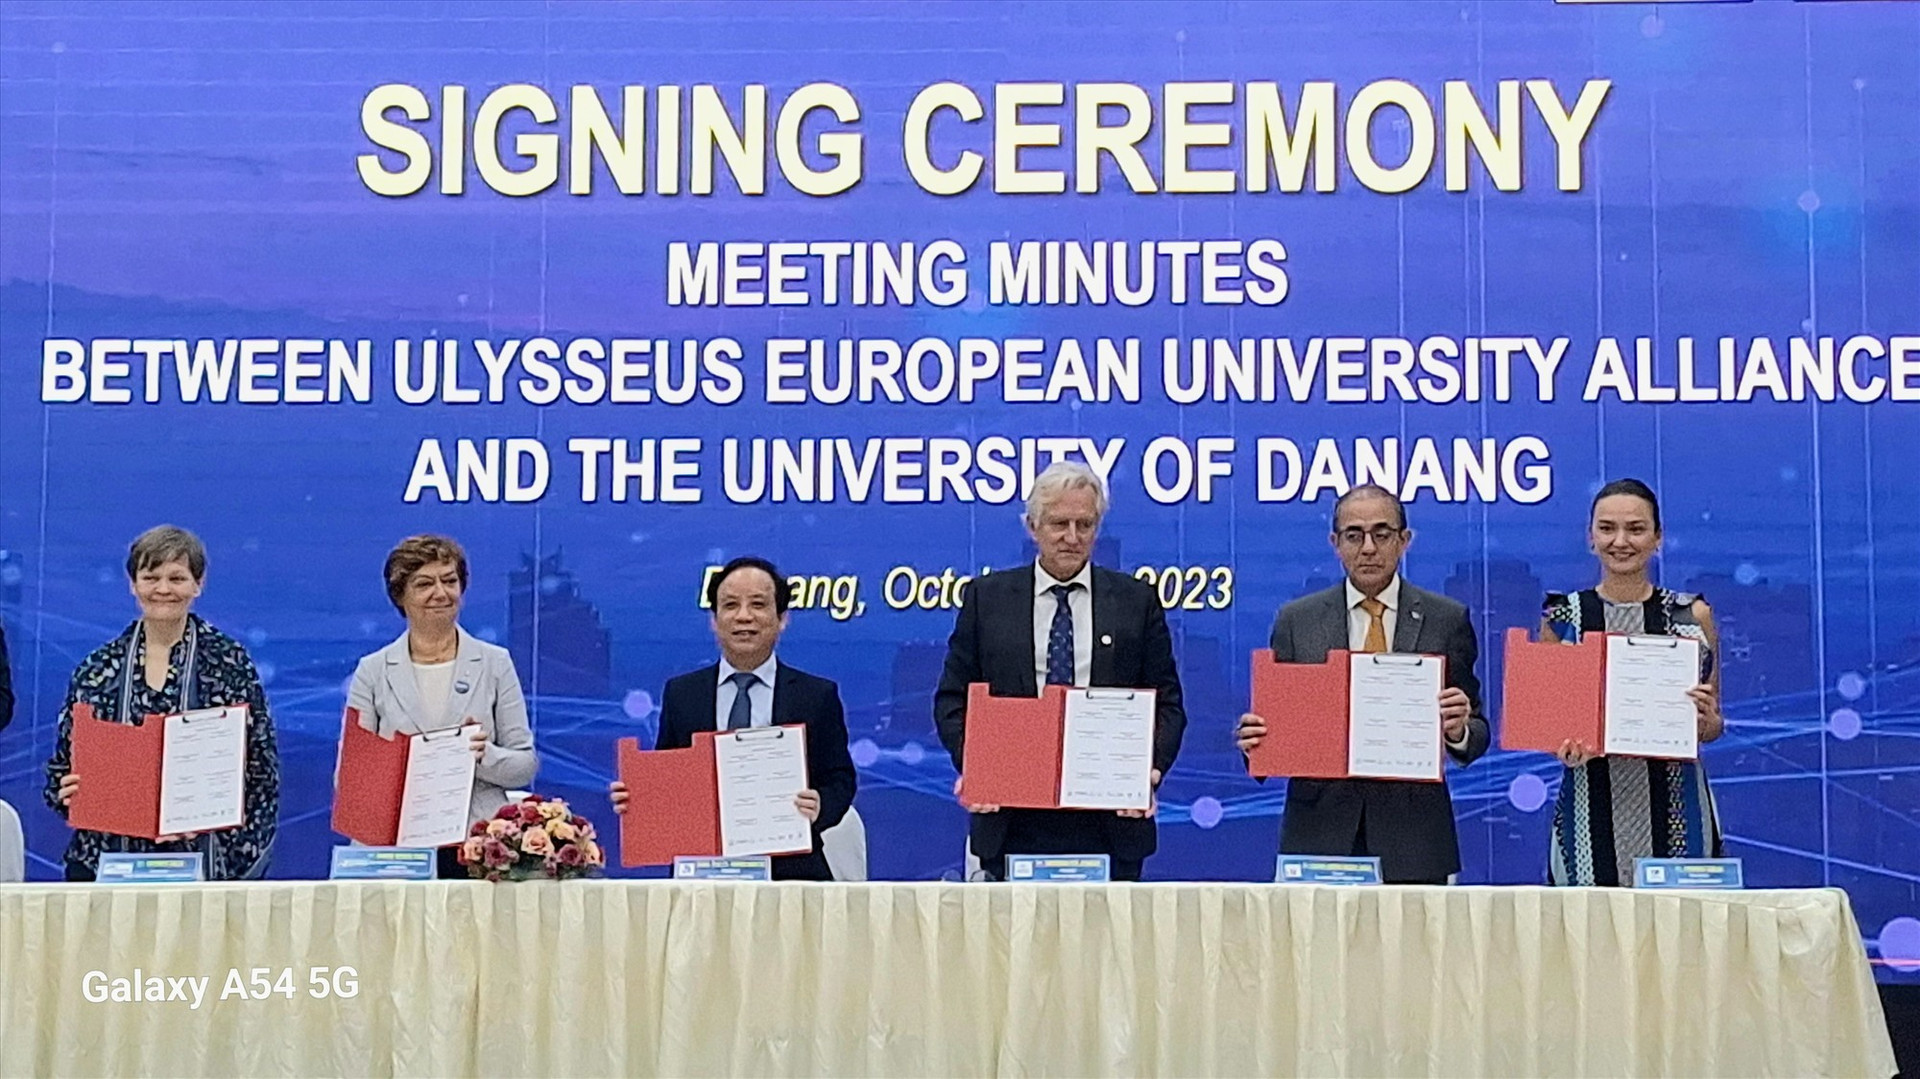 The University of Da Nang and the Ulysseus Alliance signed a cooperation agreement on the morning of October 24.